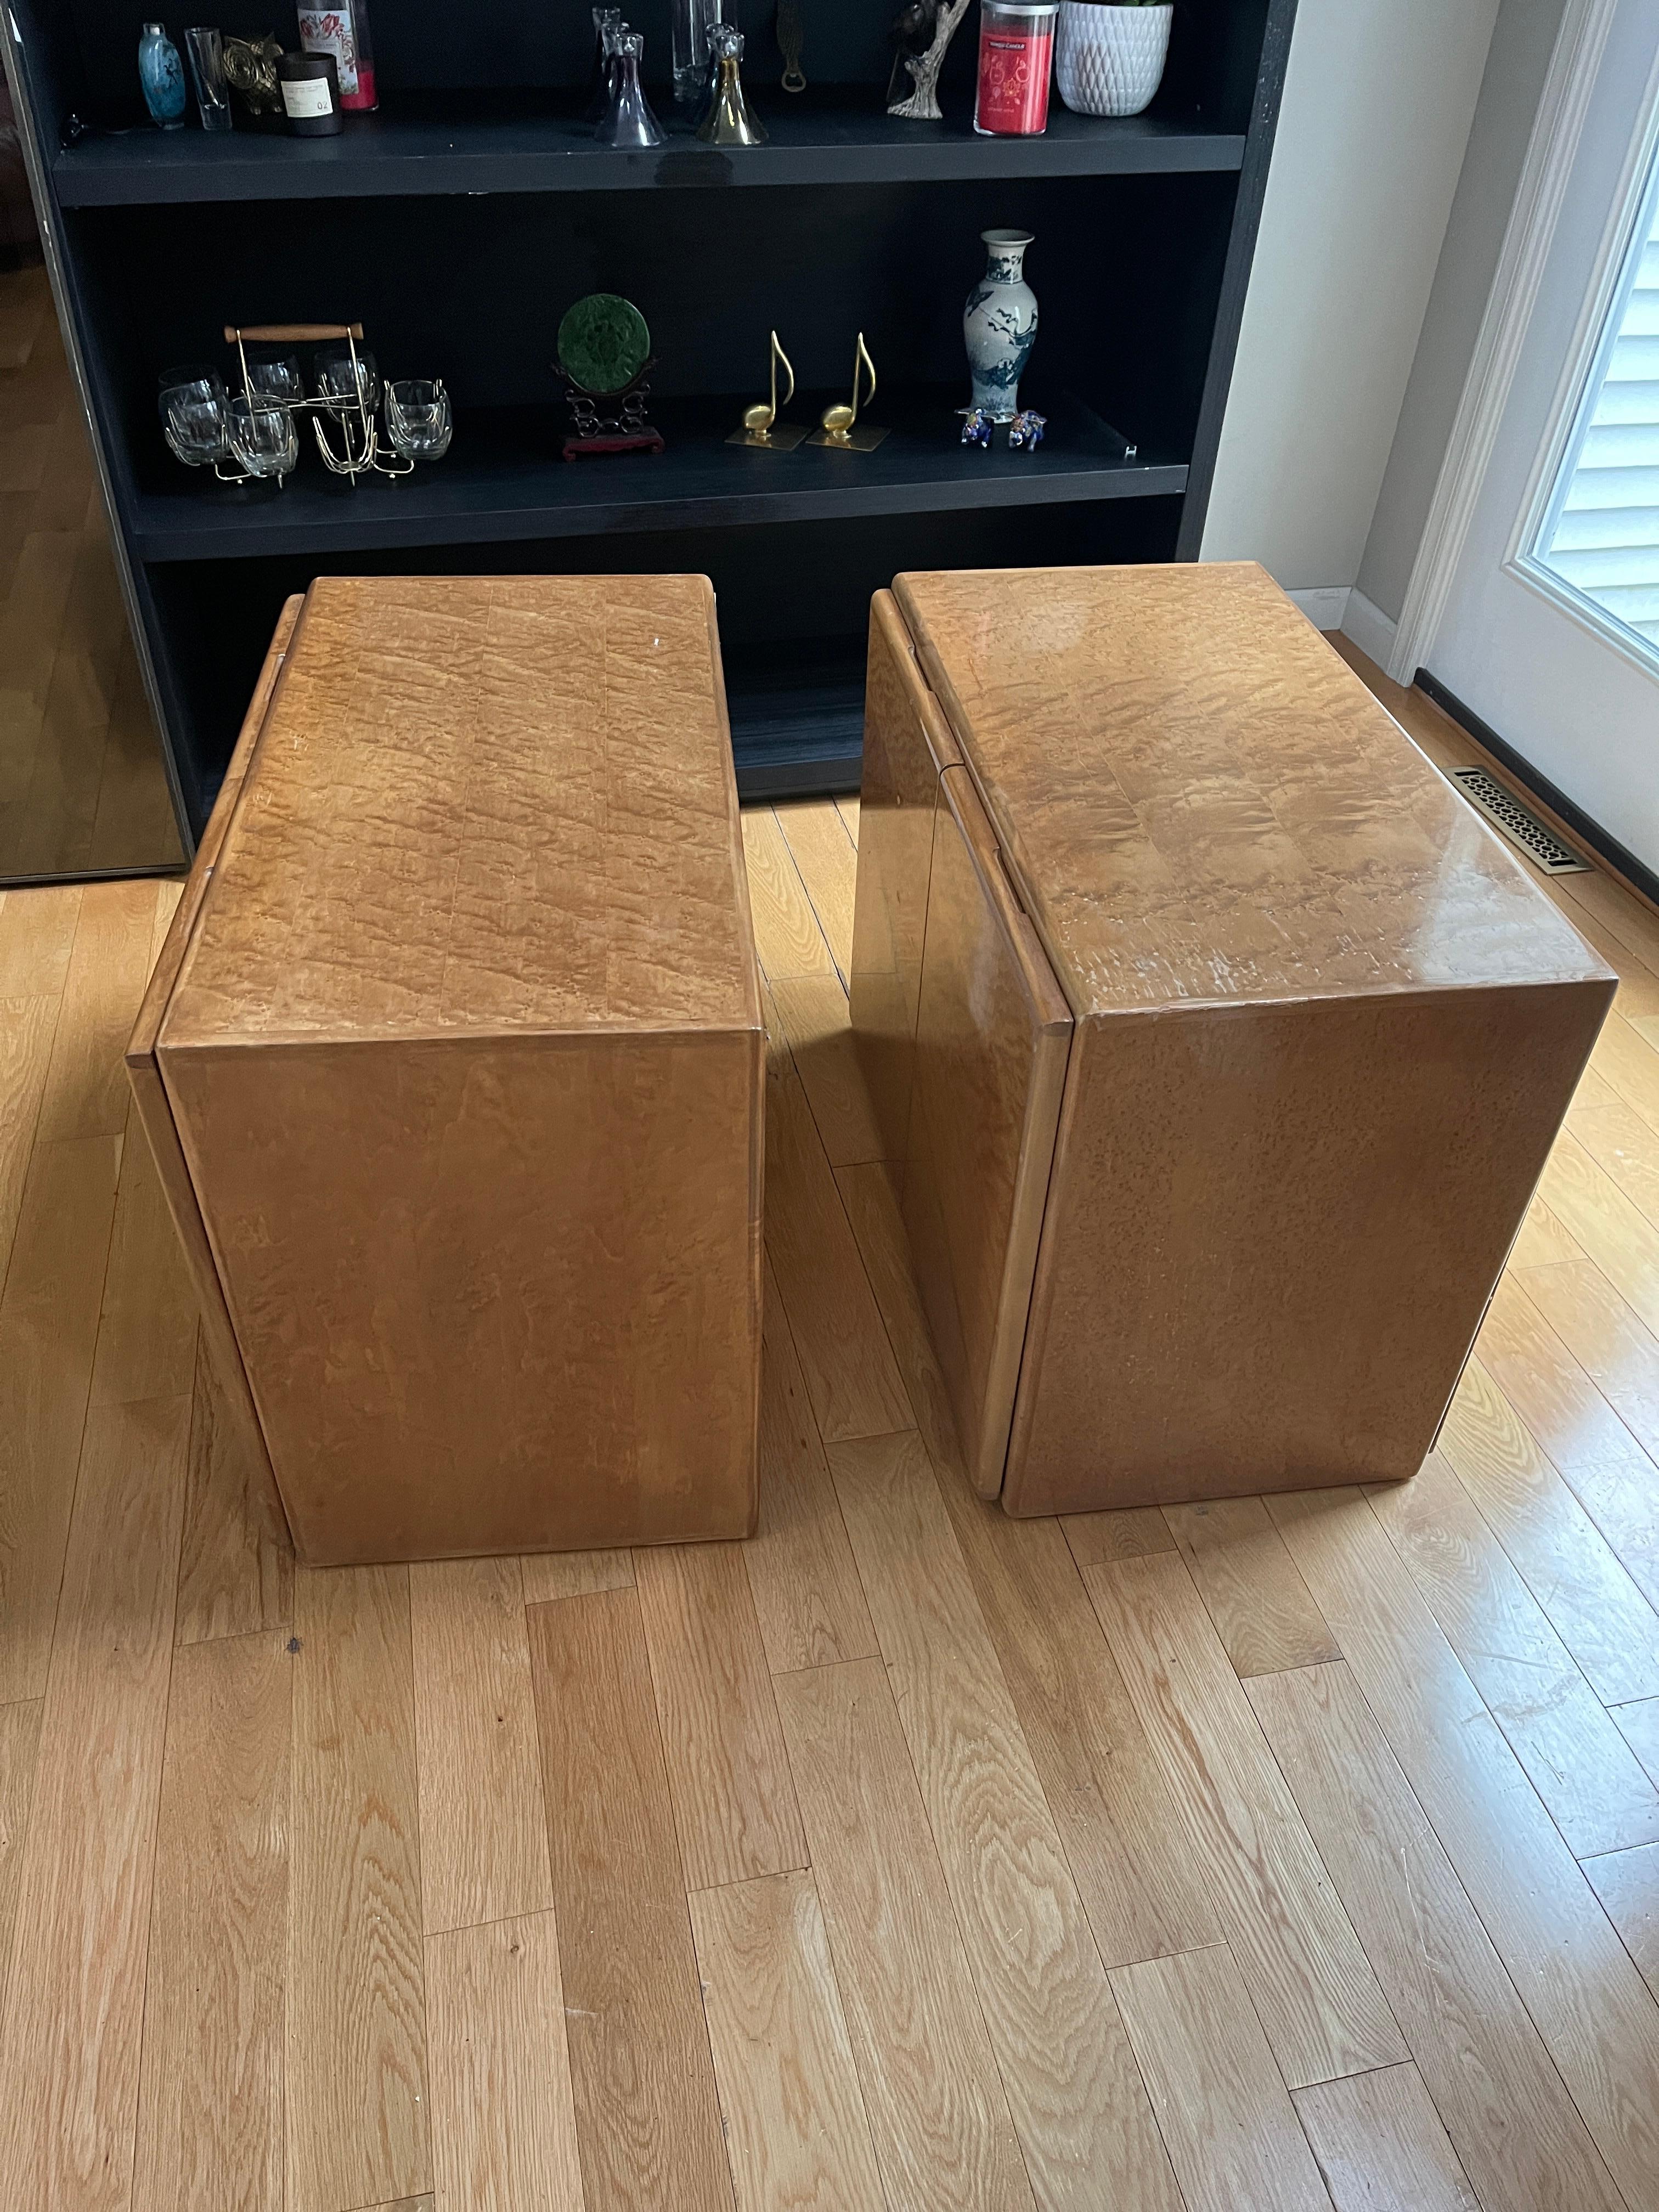 Milo Baughman Birdseye Maple MCM Night Stands In Good Condition For Sale In Southampton, NJ